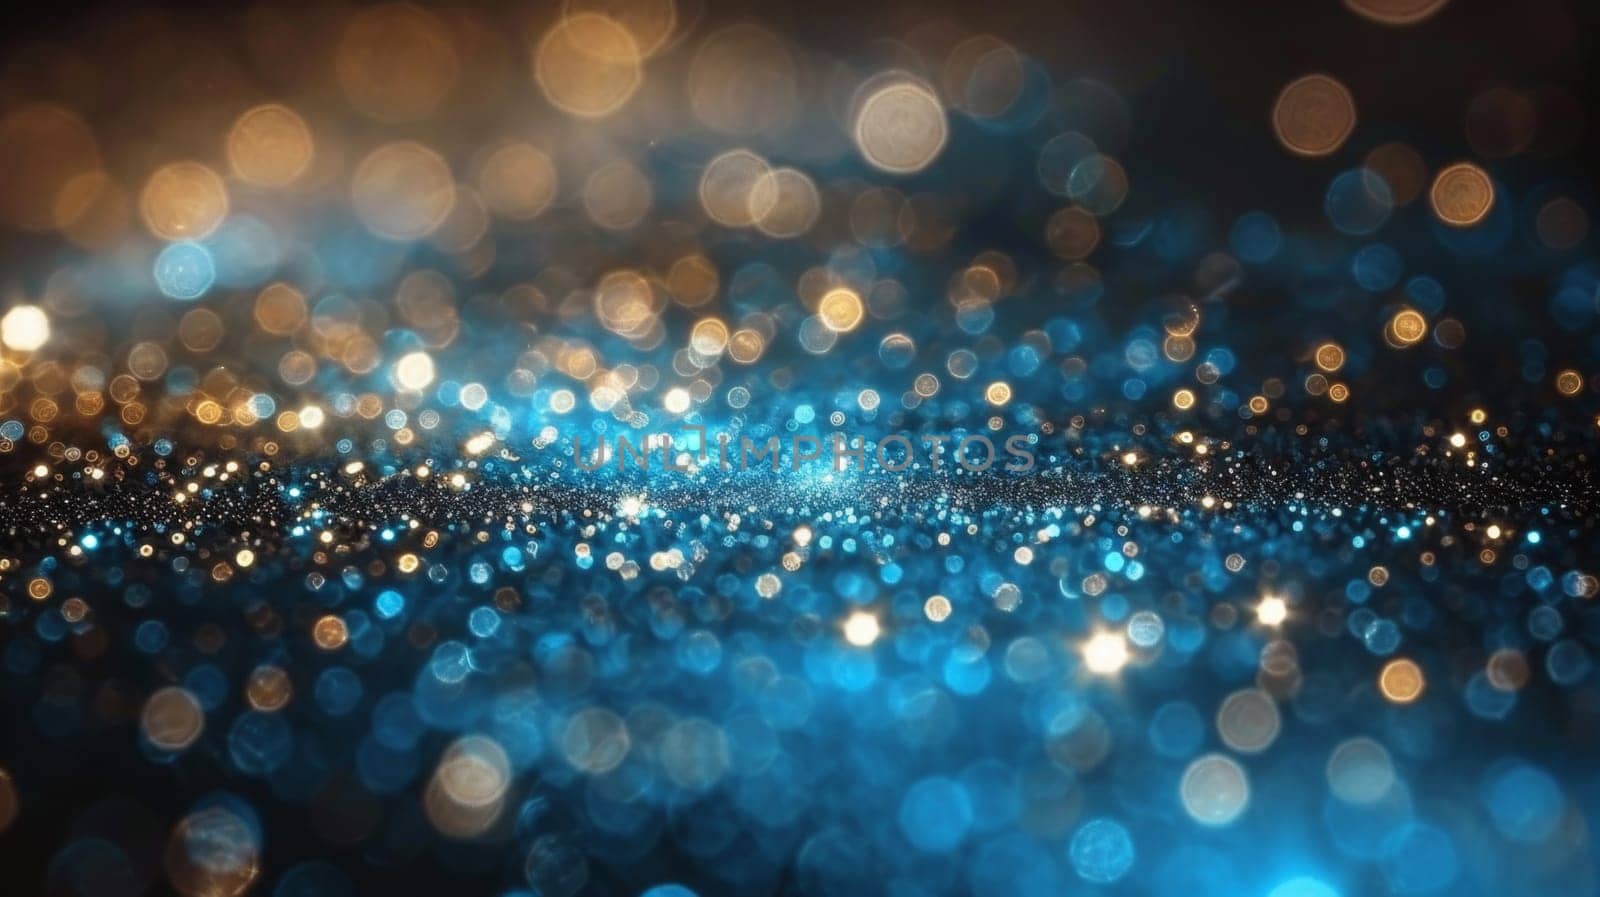 A blue and gold glittery background with lights, AI by starush